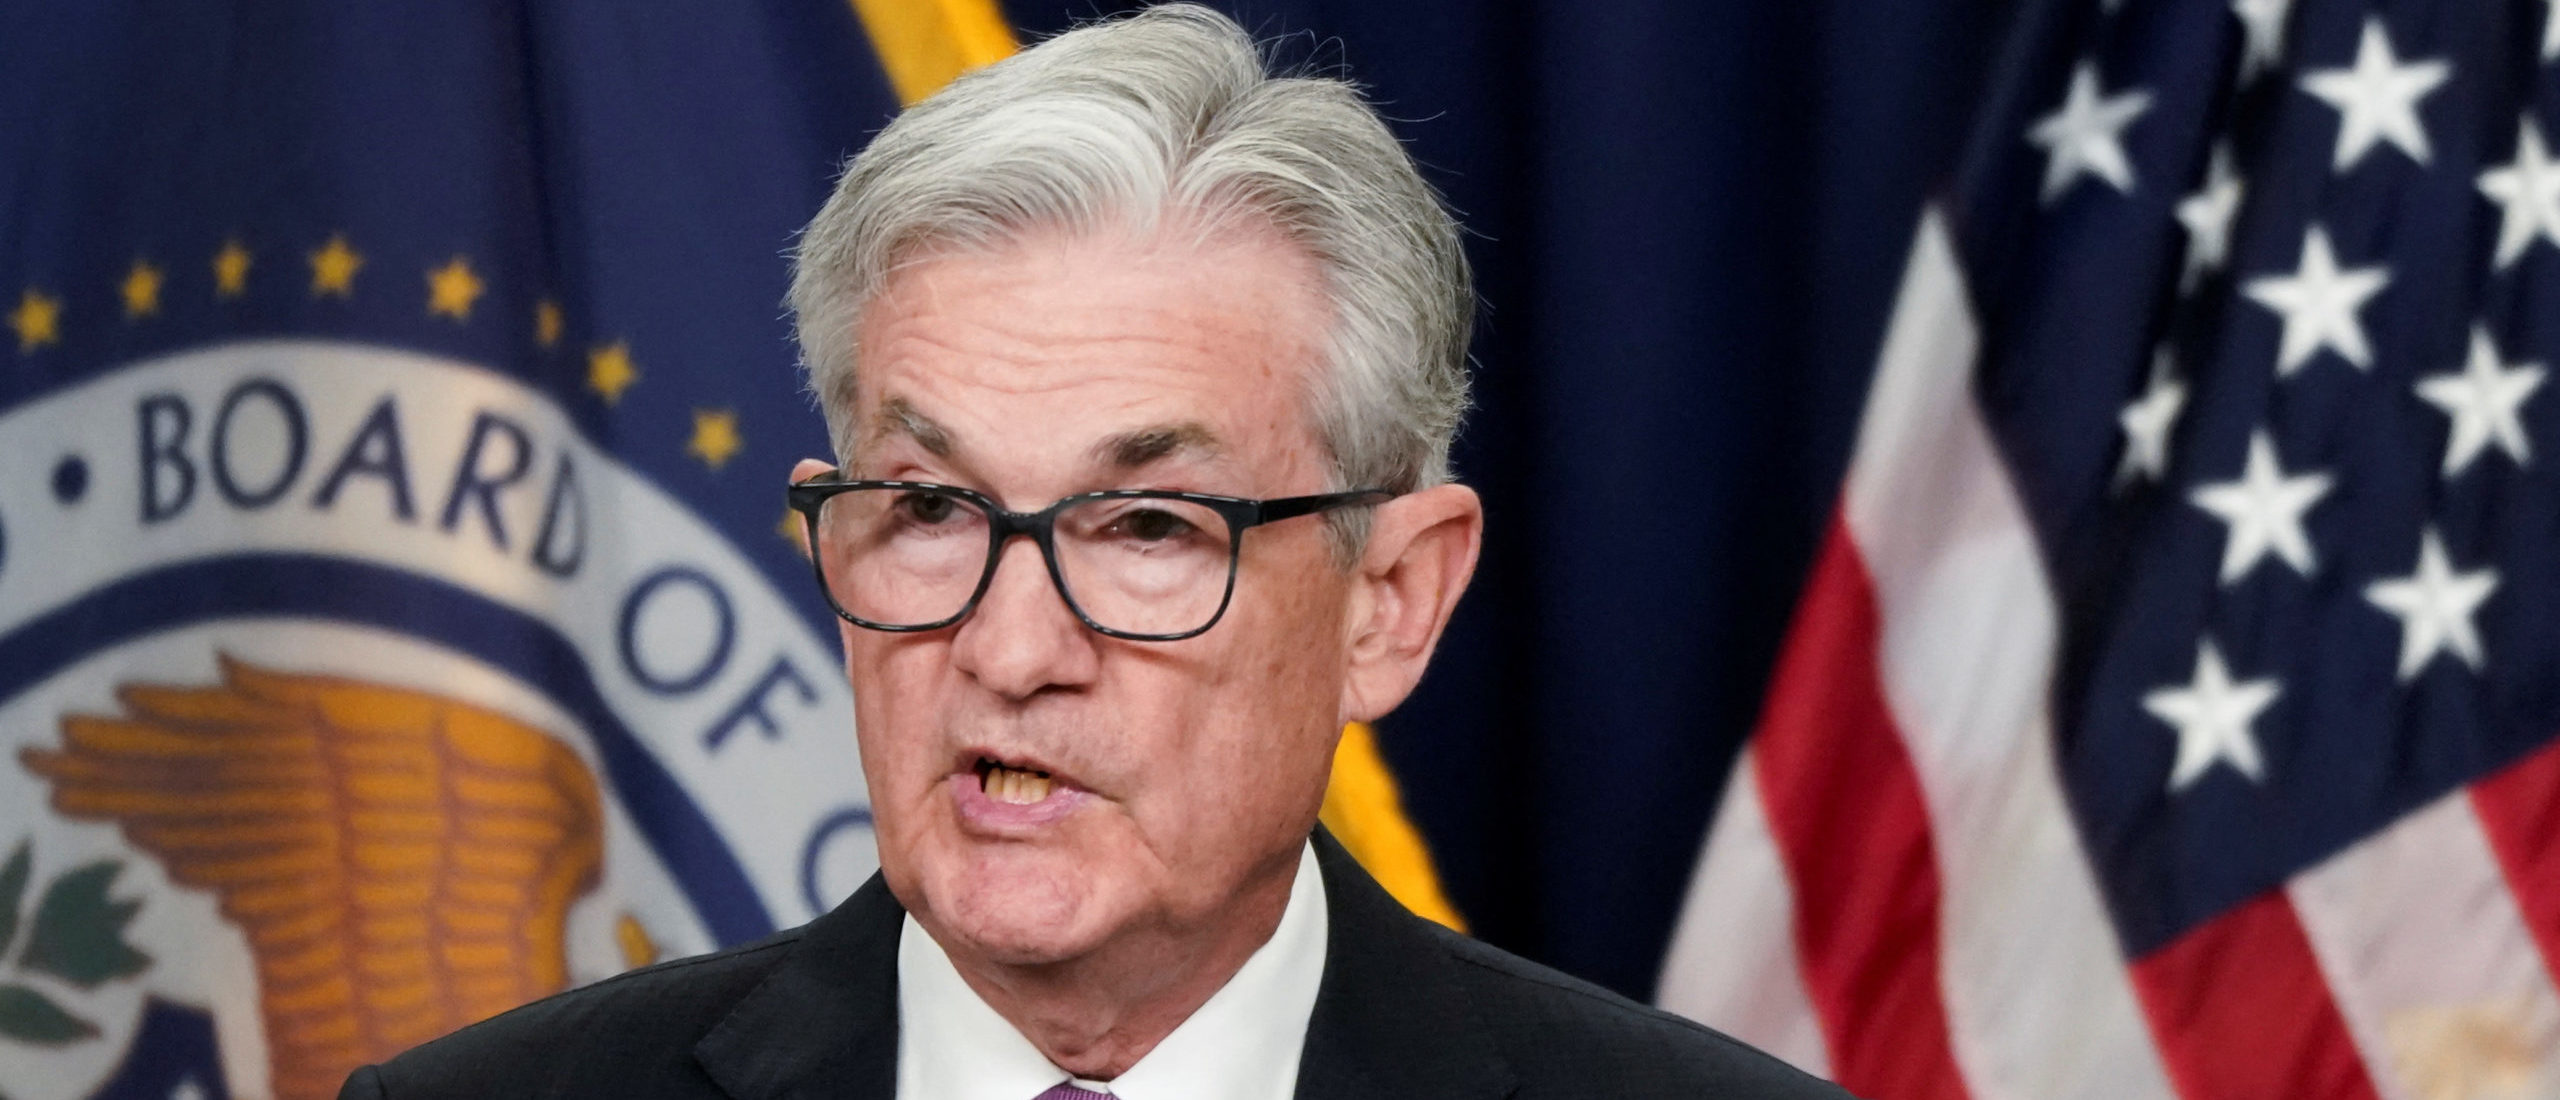 Fed reveals grim forecast in yet another troubling sign for the economy